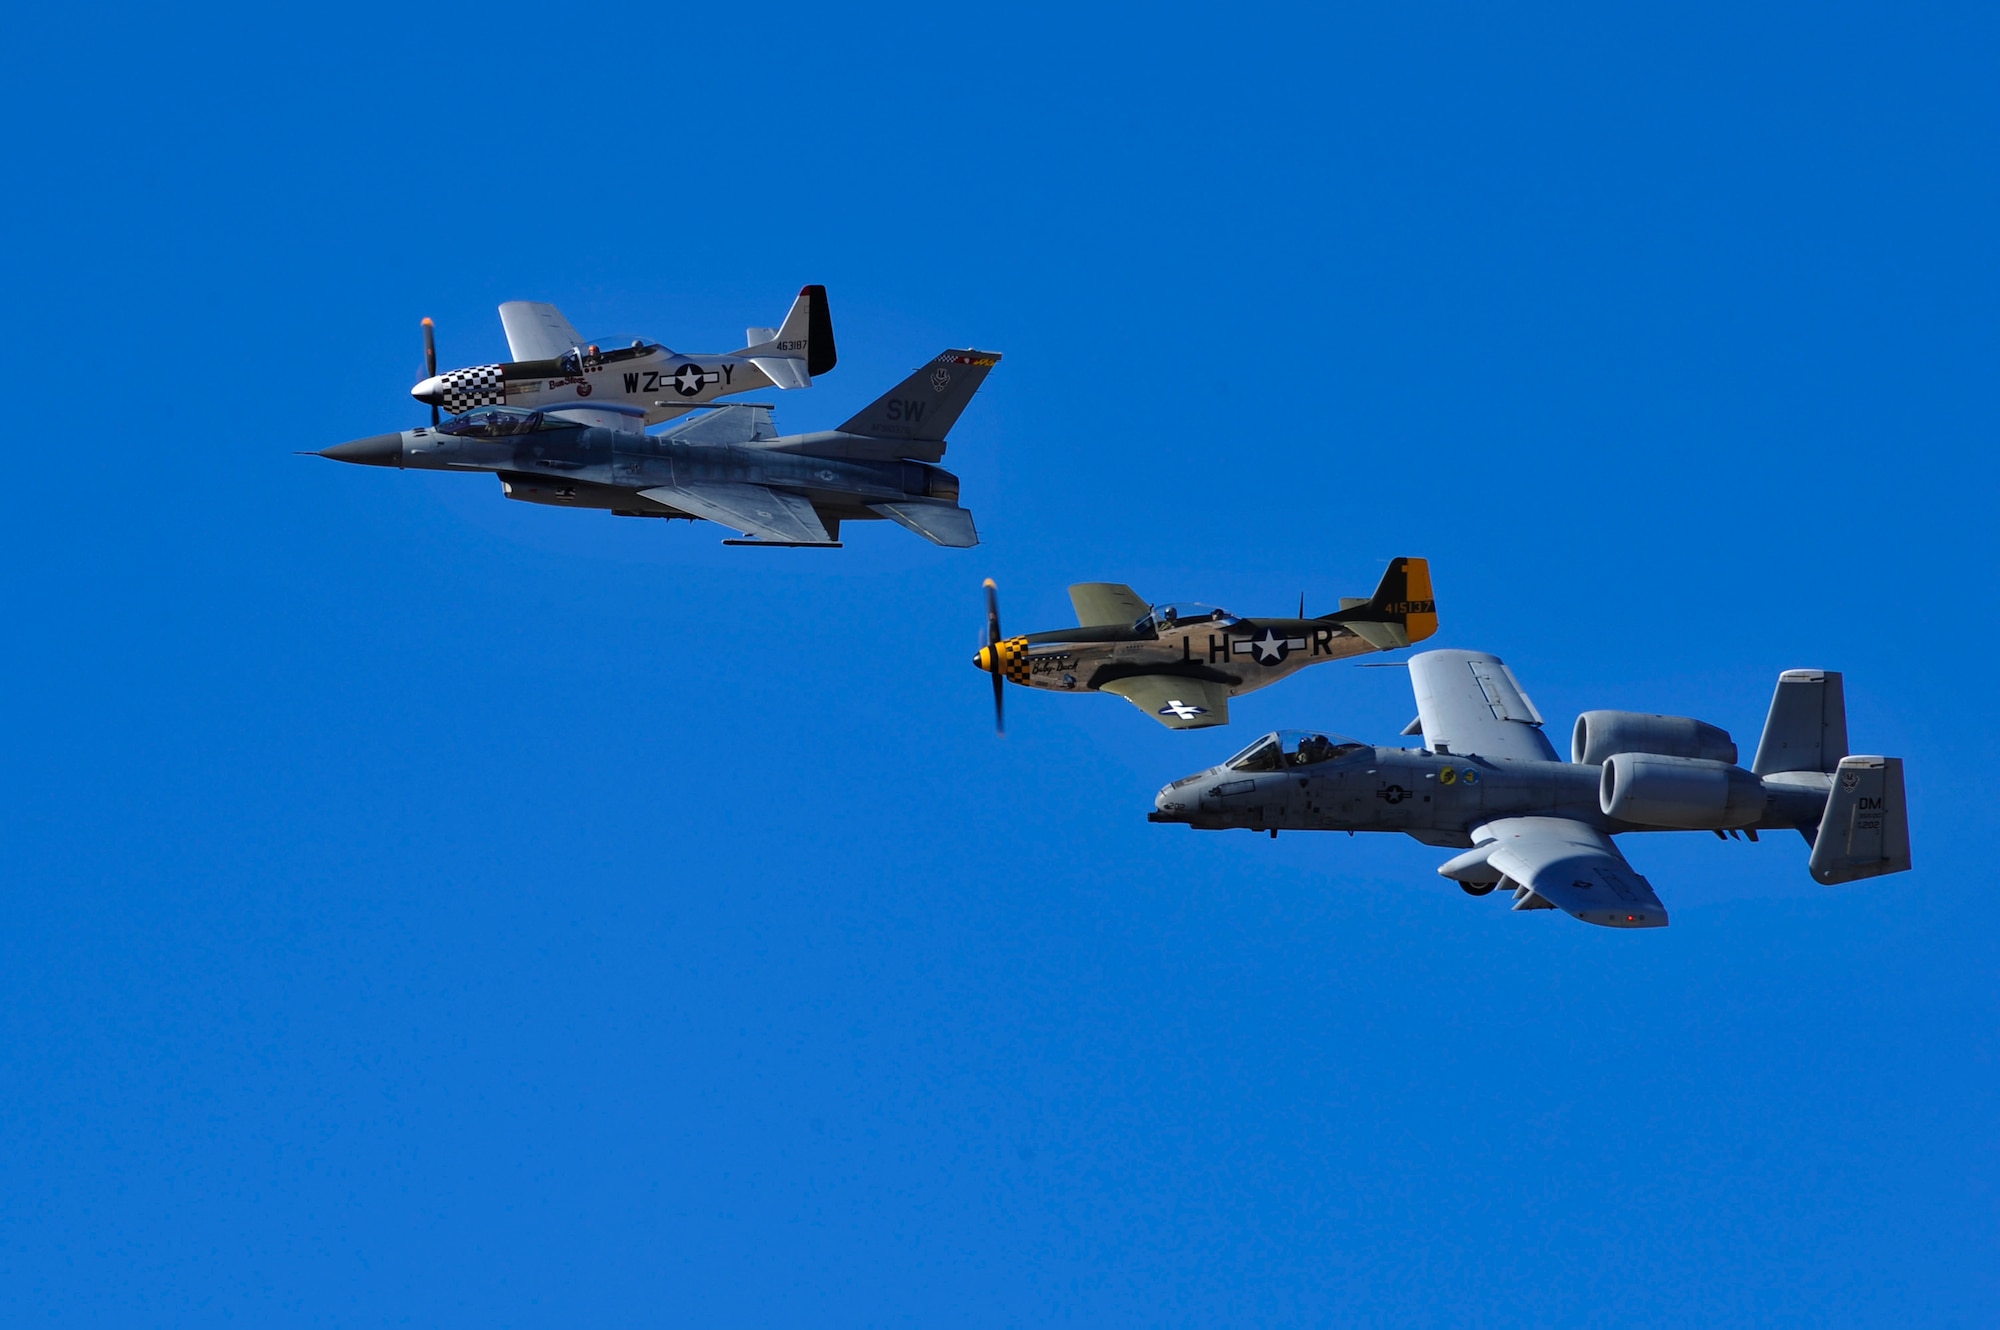 A U.S. Air Force F-16 Fighting Falcon, A-10C Thunderbolt II and two TF-51 Mustangs perform aerial demonstrations during the 2017 Heritage Flight Training and Certification Course at Davis-Monthan Air Force Base, Ariz., Feb. 11, 2017. The annual aerial demonstration training event has been held at D-M since 2001. The modern aircraft that participated in this year’s HFTCC were the F-35 Lightning II, the F-22 Raptor, F-16 Fighting Falcon and the A-10C Thunderbolt II. The historic aircraft included the P-51 and T-51 Mustangs, the P-40 Warhawk, the P-38 Lightning, the P-47 Thunderbolt, the T-33 Shooting Star and the F-86 Sabre. (U.S. Air Force photo by Senior Airman Cheyenne A. Powers)